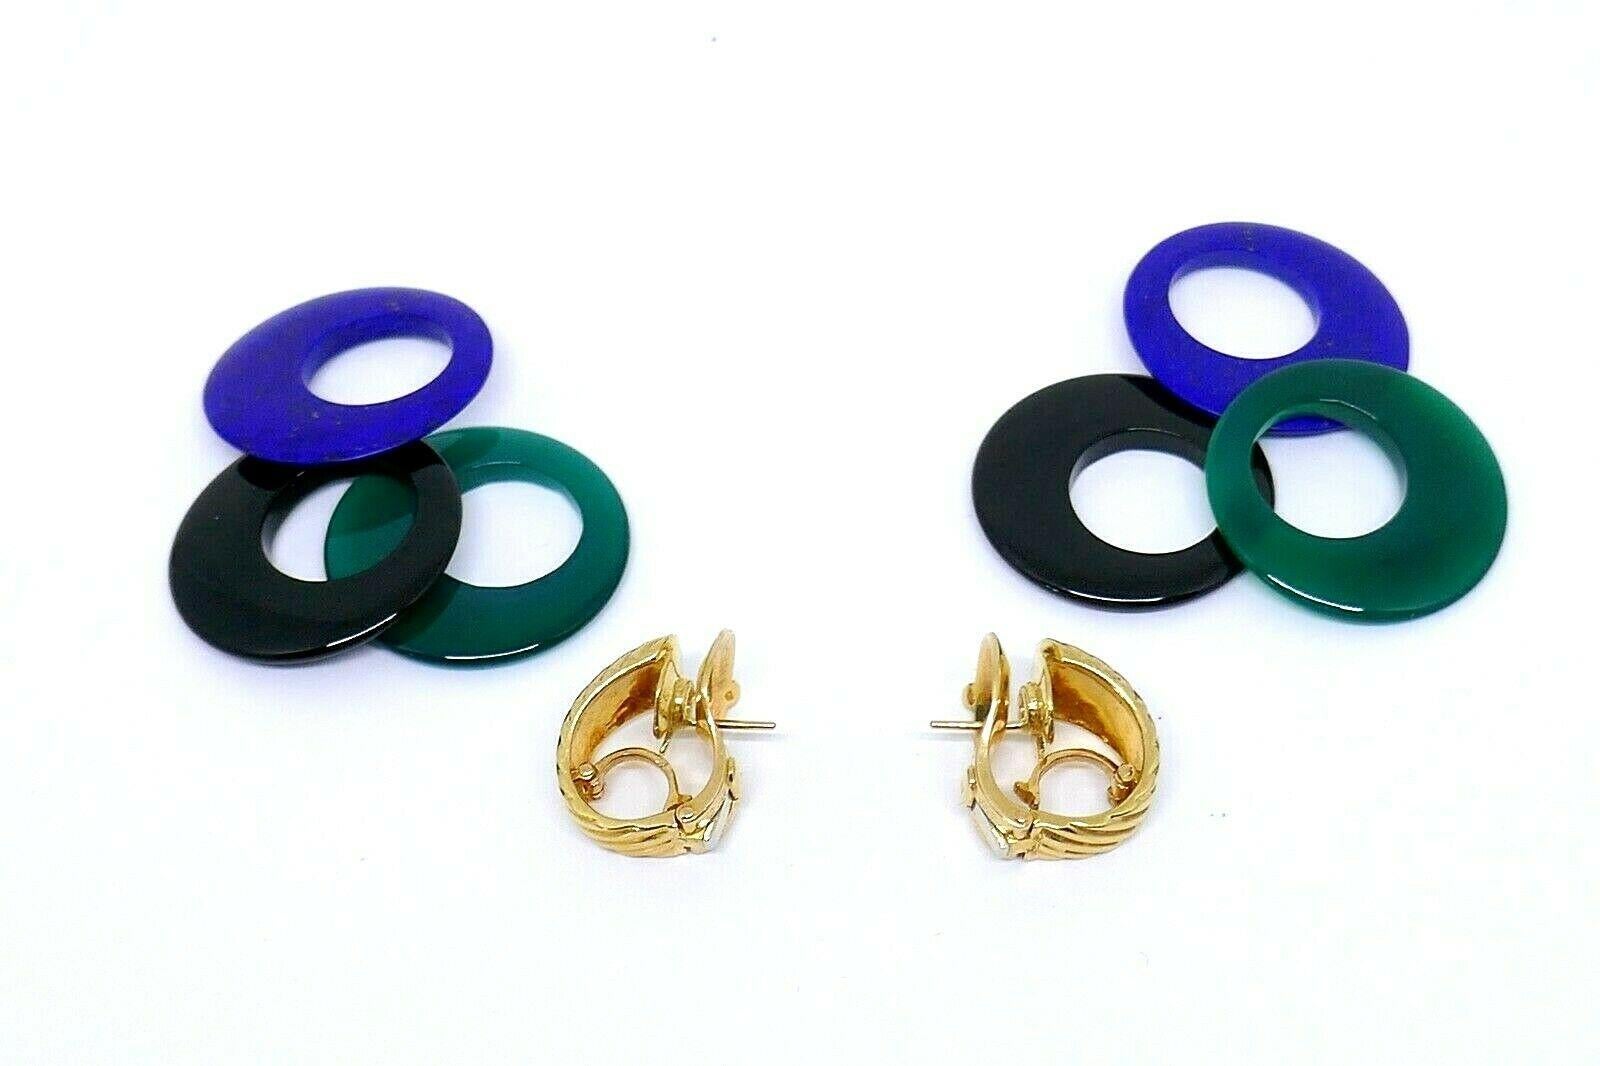 Four-in-one interchangeable vintage yellow gold earrings from Van Cleef and Arpels. 18k yellow gold shell earrings is a base for three disks that you can wear color coordinated with your attire. Onyx, lapis and malachite disks can be worn as a